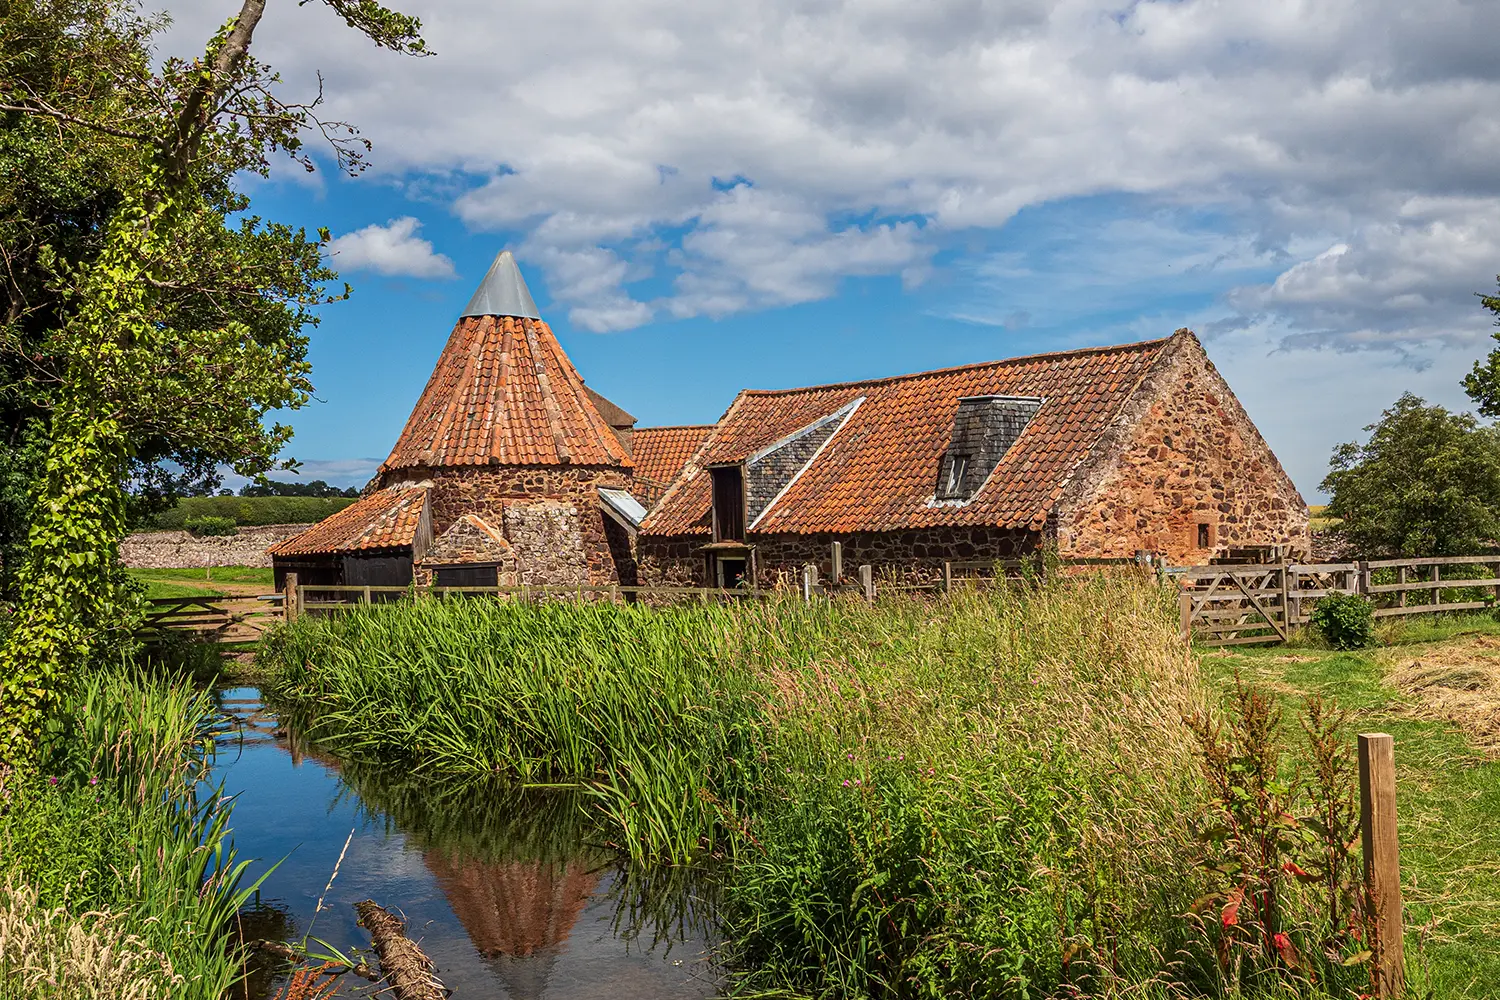 Preston Mill, East Lothian, Scotland, warm sunny day with ancient building reflected in calm water, it is also used as a film location in The Outlander series